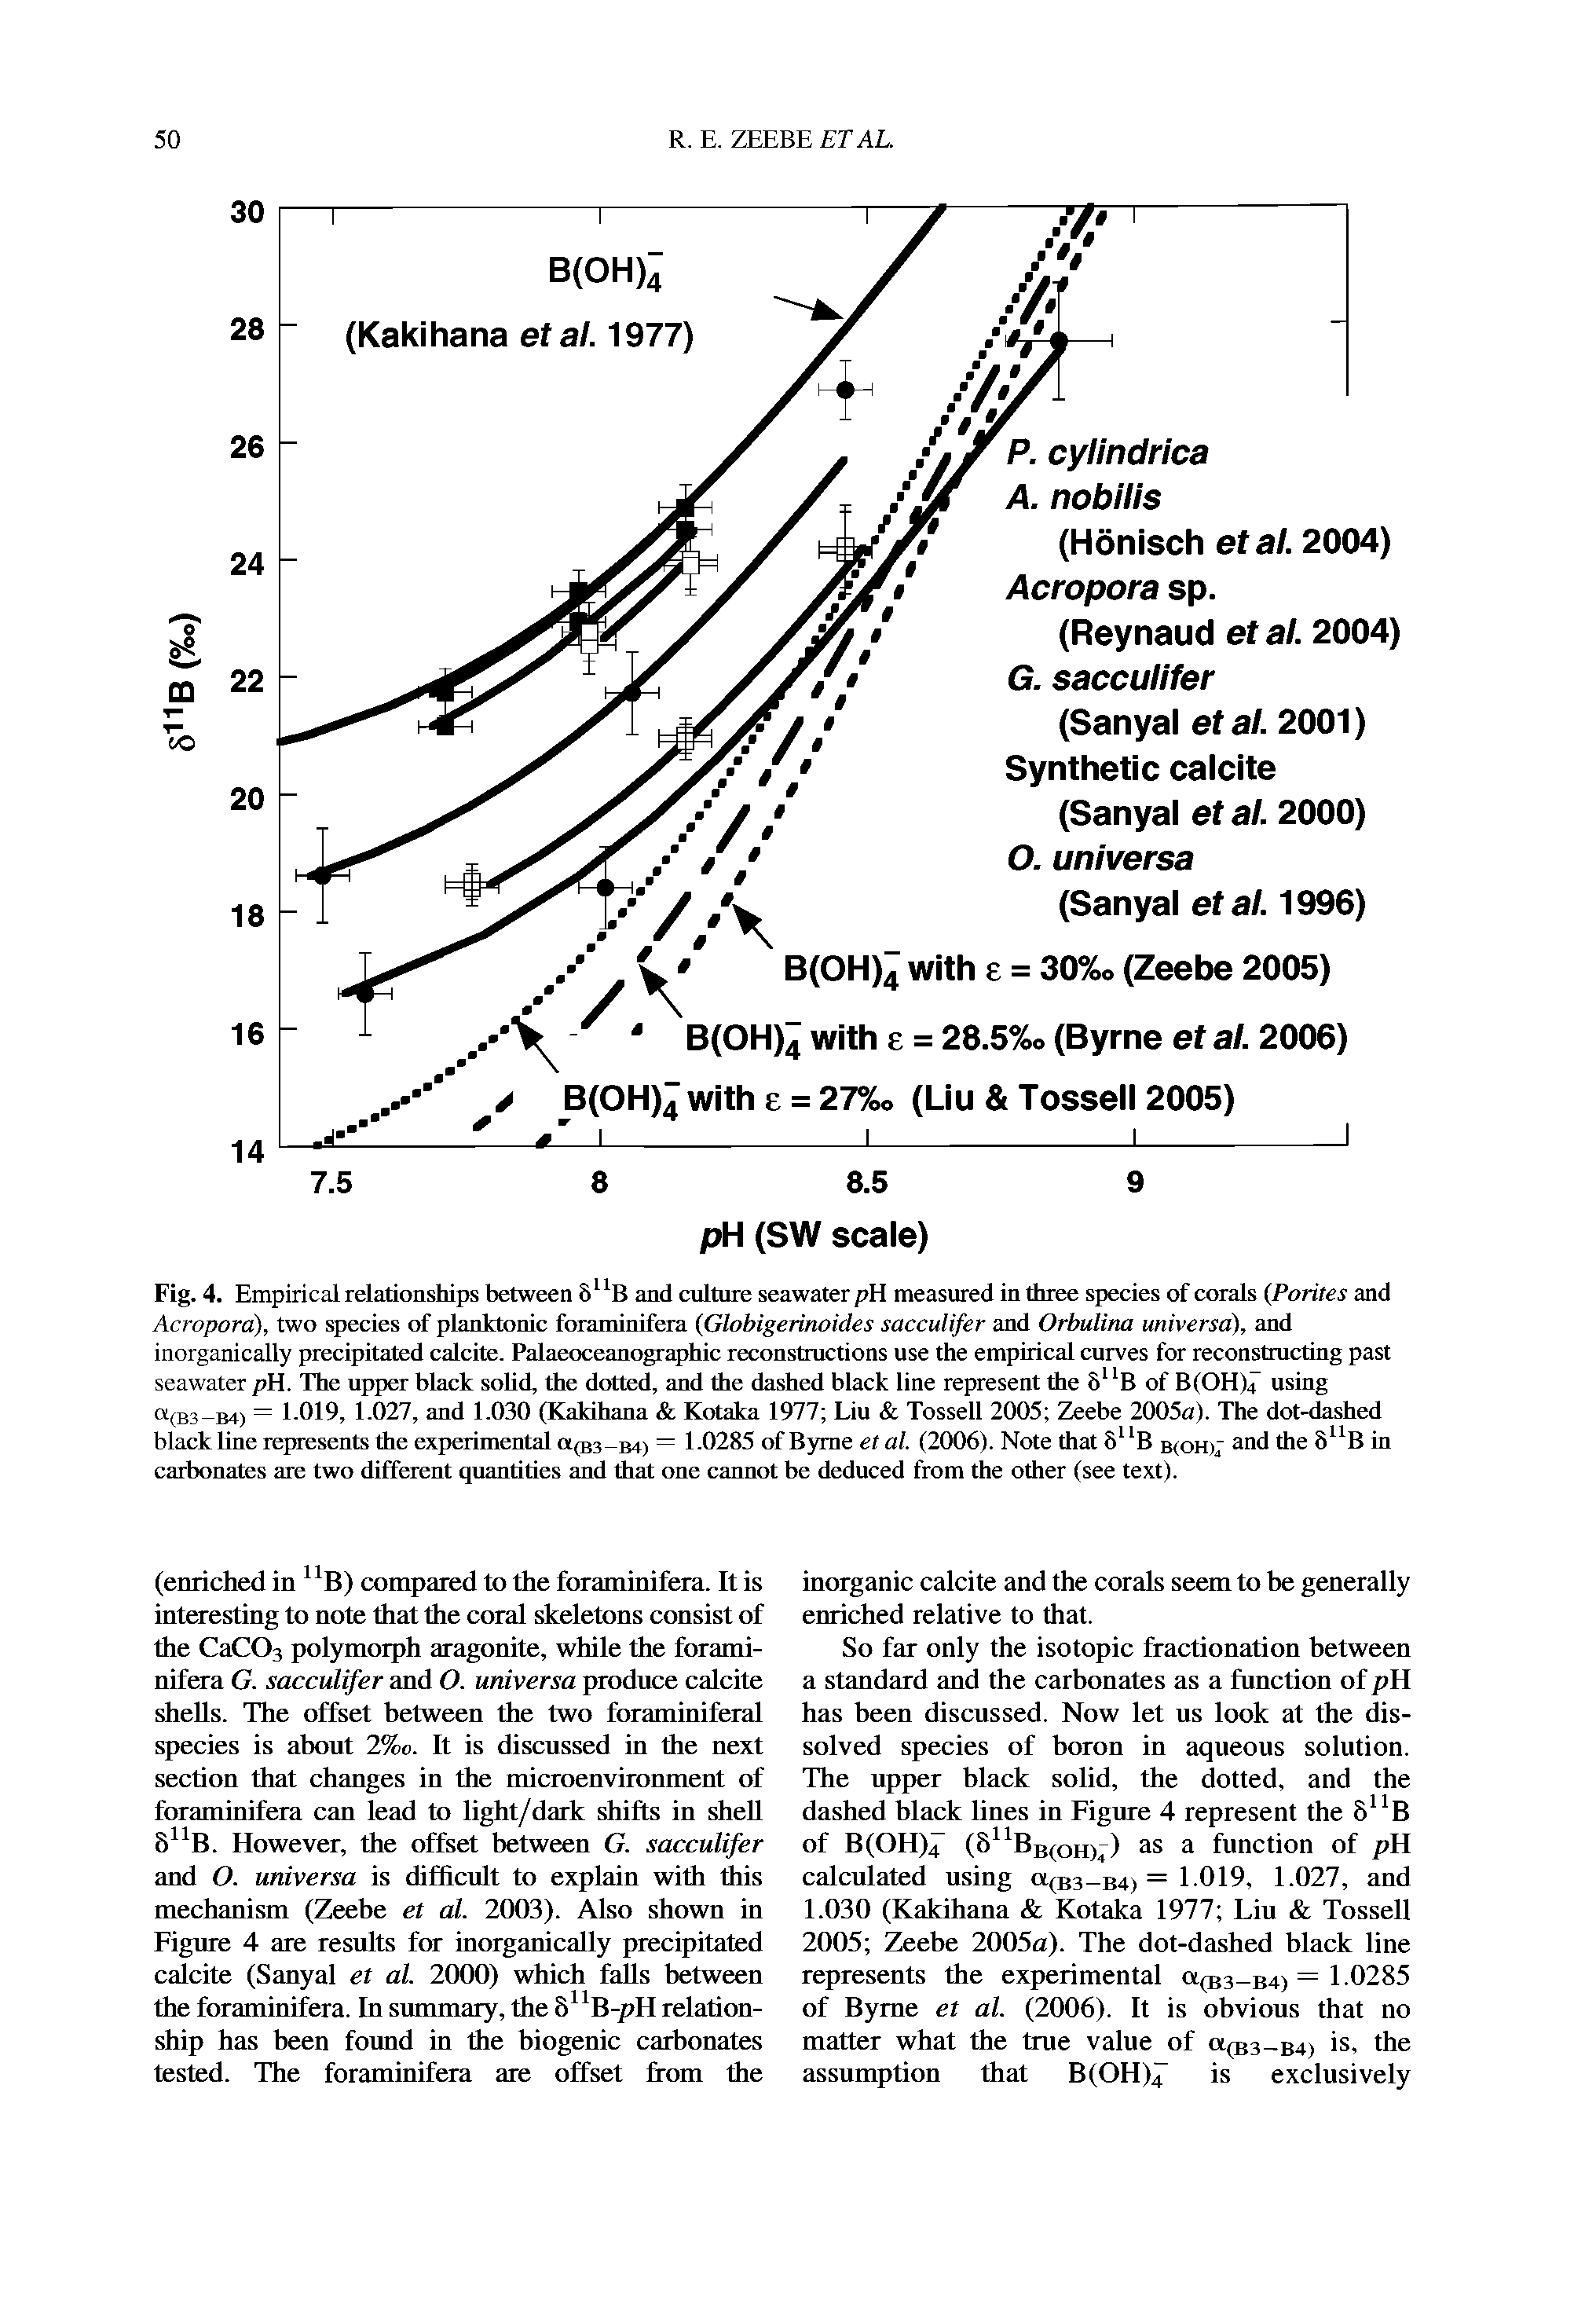 Fig. 4. Empirical relationships between 8 and culture seawater pH measured in three species of corals (Pontes and Acropora), two species of planktonic foraminifera (Globigerinoides sacculifer and Orbulina universa), and inorganically precipitated calcite. Palaeoceanographic reconstractions use the empirical curves for reconstracting past seawater pH. The upper black sohd, the dotted, and the dashed black line represent the 8"B of B(OH)4 using B3-b4) — 1.019, 1.027, and 1.030 (Kakihana Kotaka 1977 Liu Tossell 2005 Zeebe 2005a). The dot-dashed black line represents the experimental (b3-b4) = 1.0285 of Byrne etal. (2006). Note that 8"B b(OH) and the 8 B in carbonates are two different quantities and that one cannot be deduced from the other (see text).